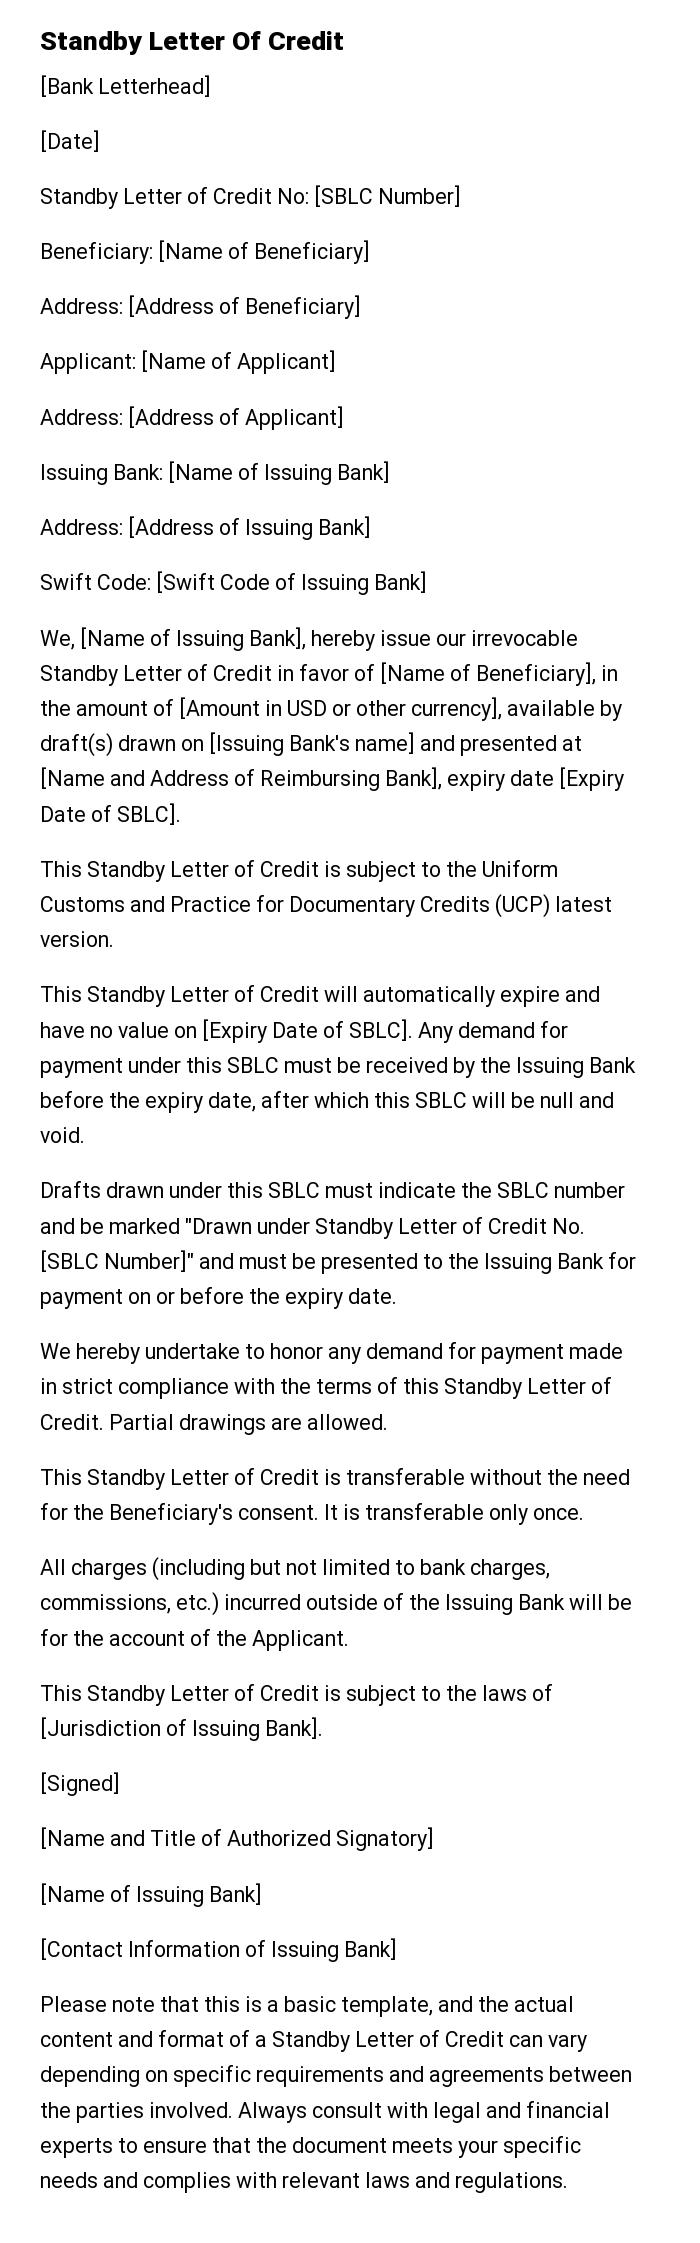 Standby Letter Of Credit